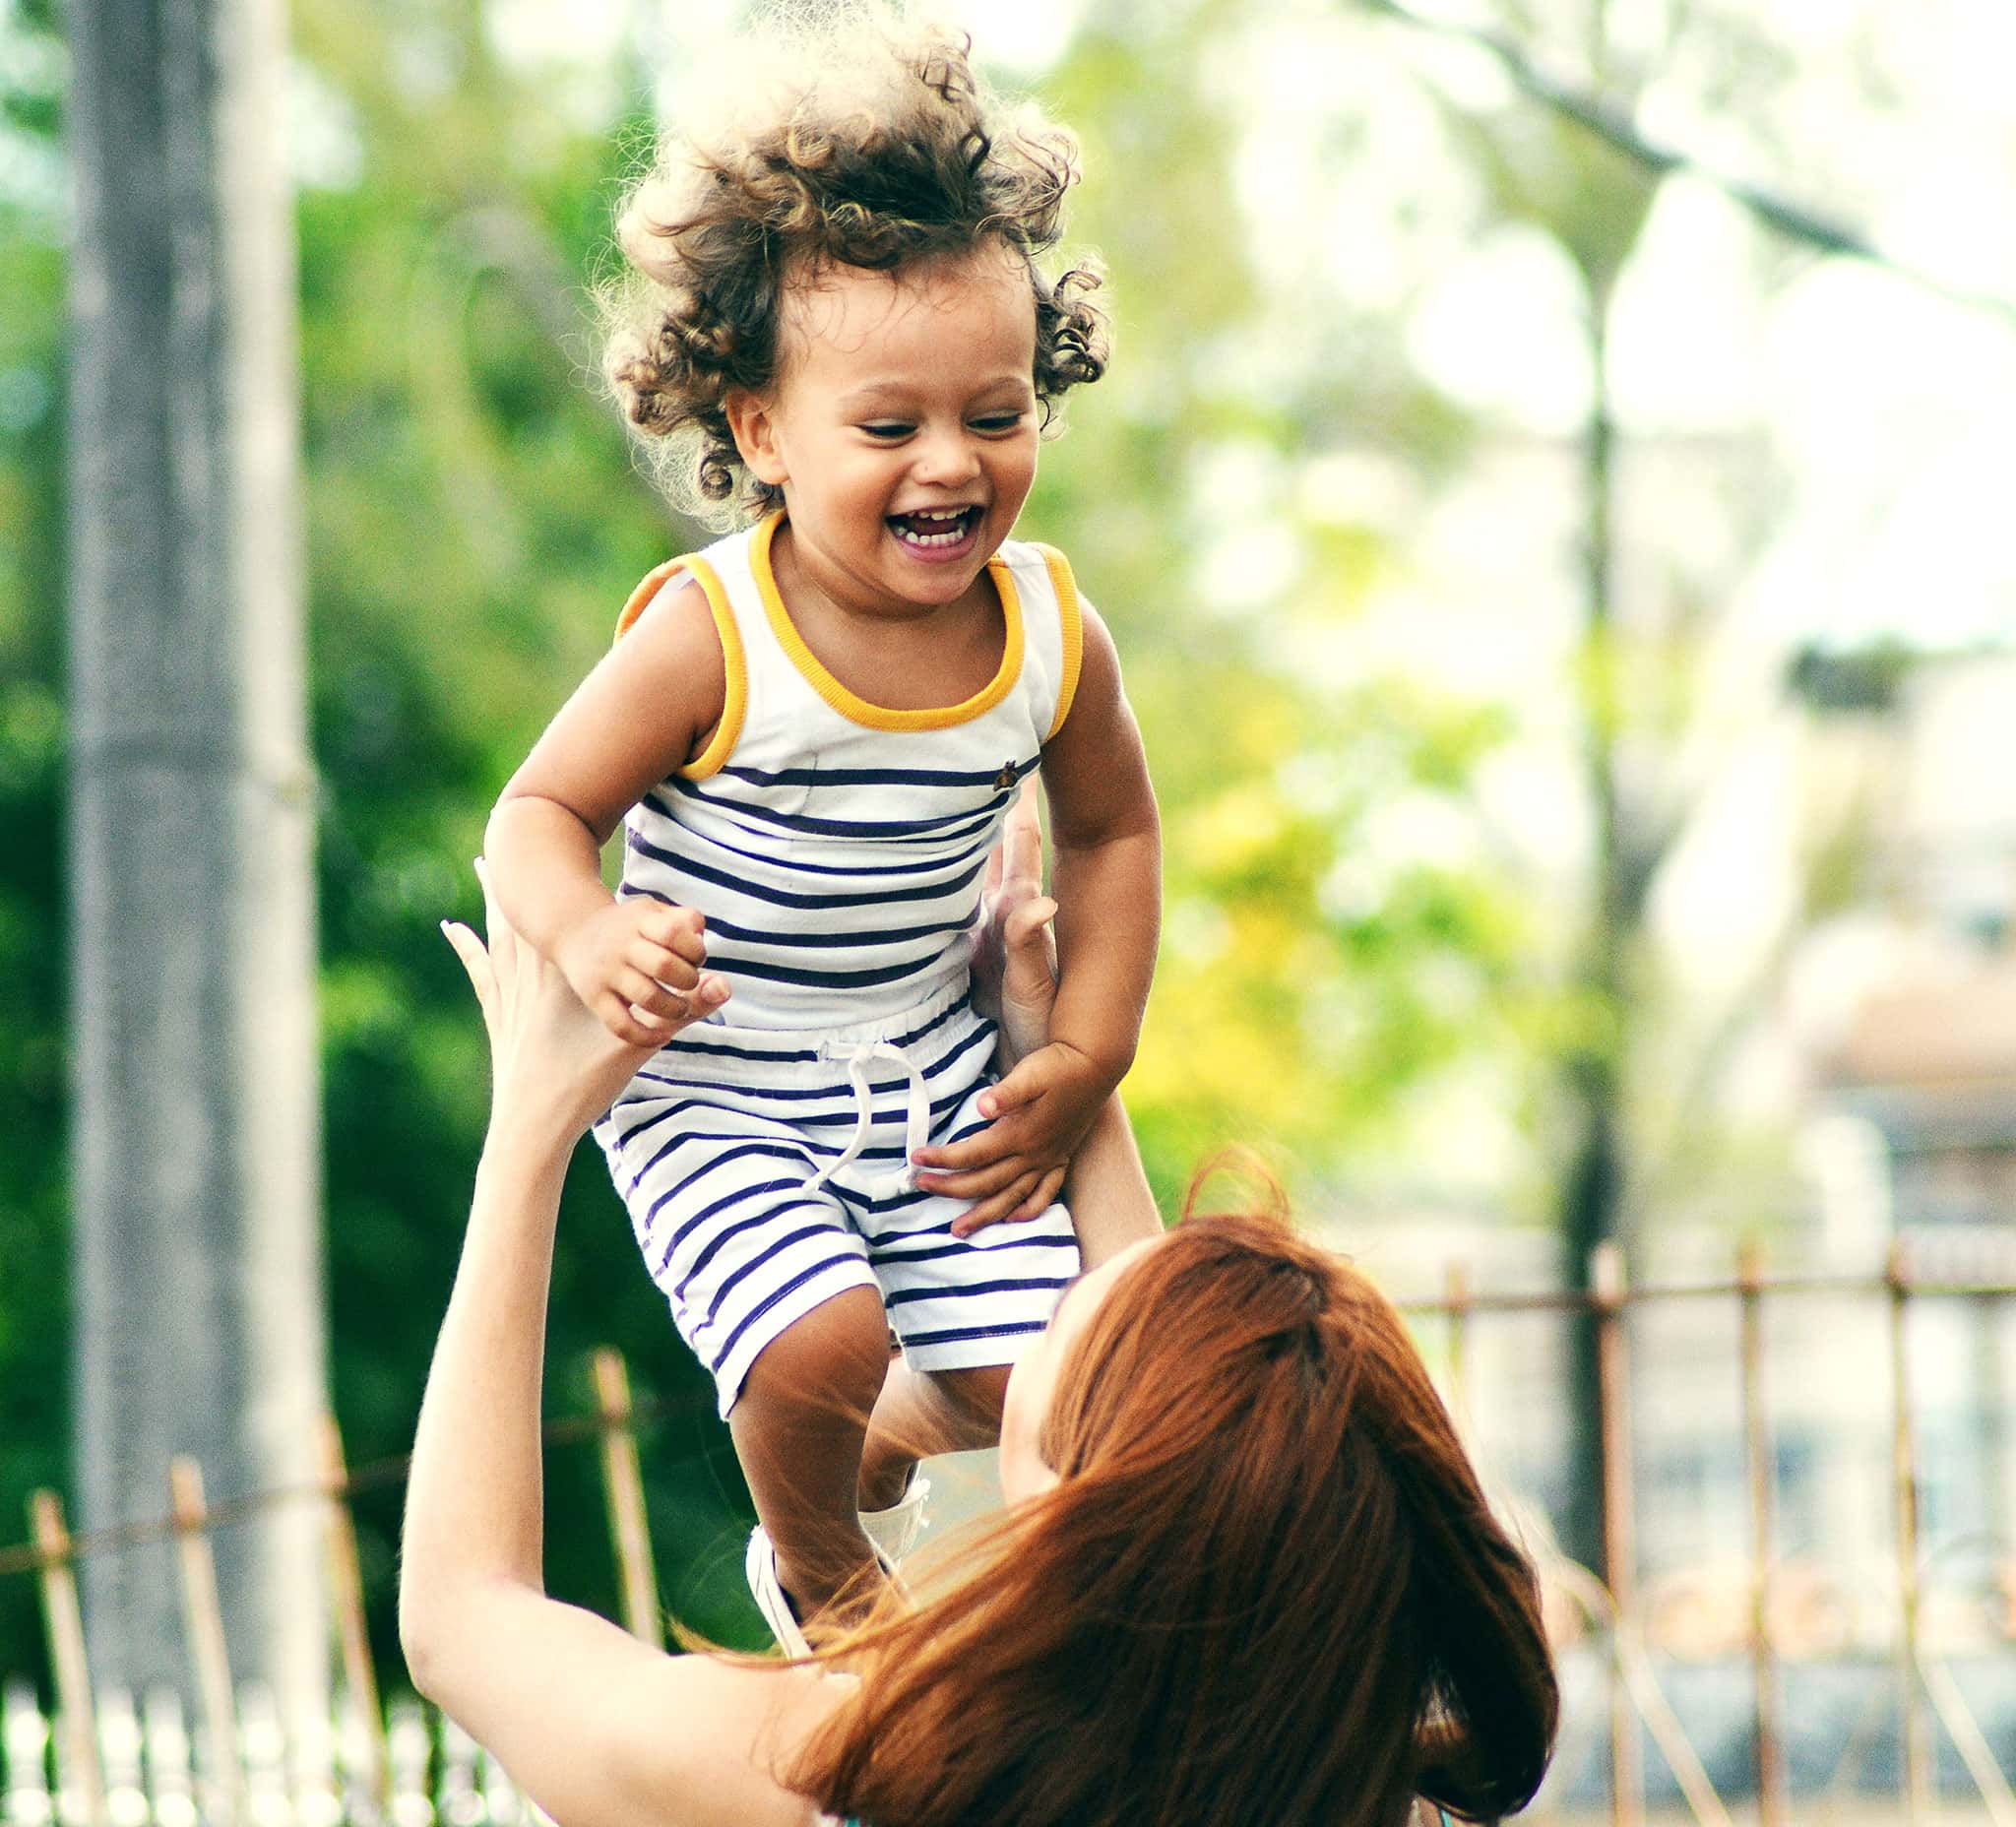 A woman tosses a laughing toddler up in the air.